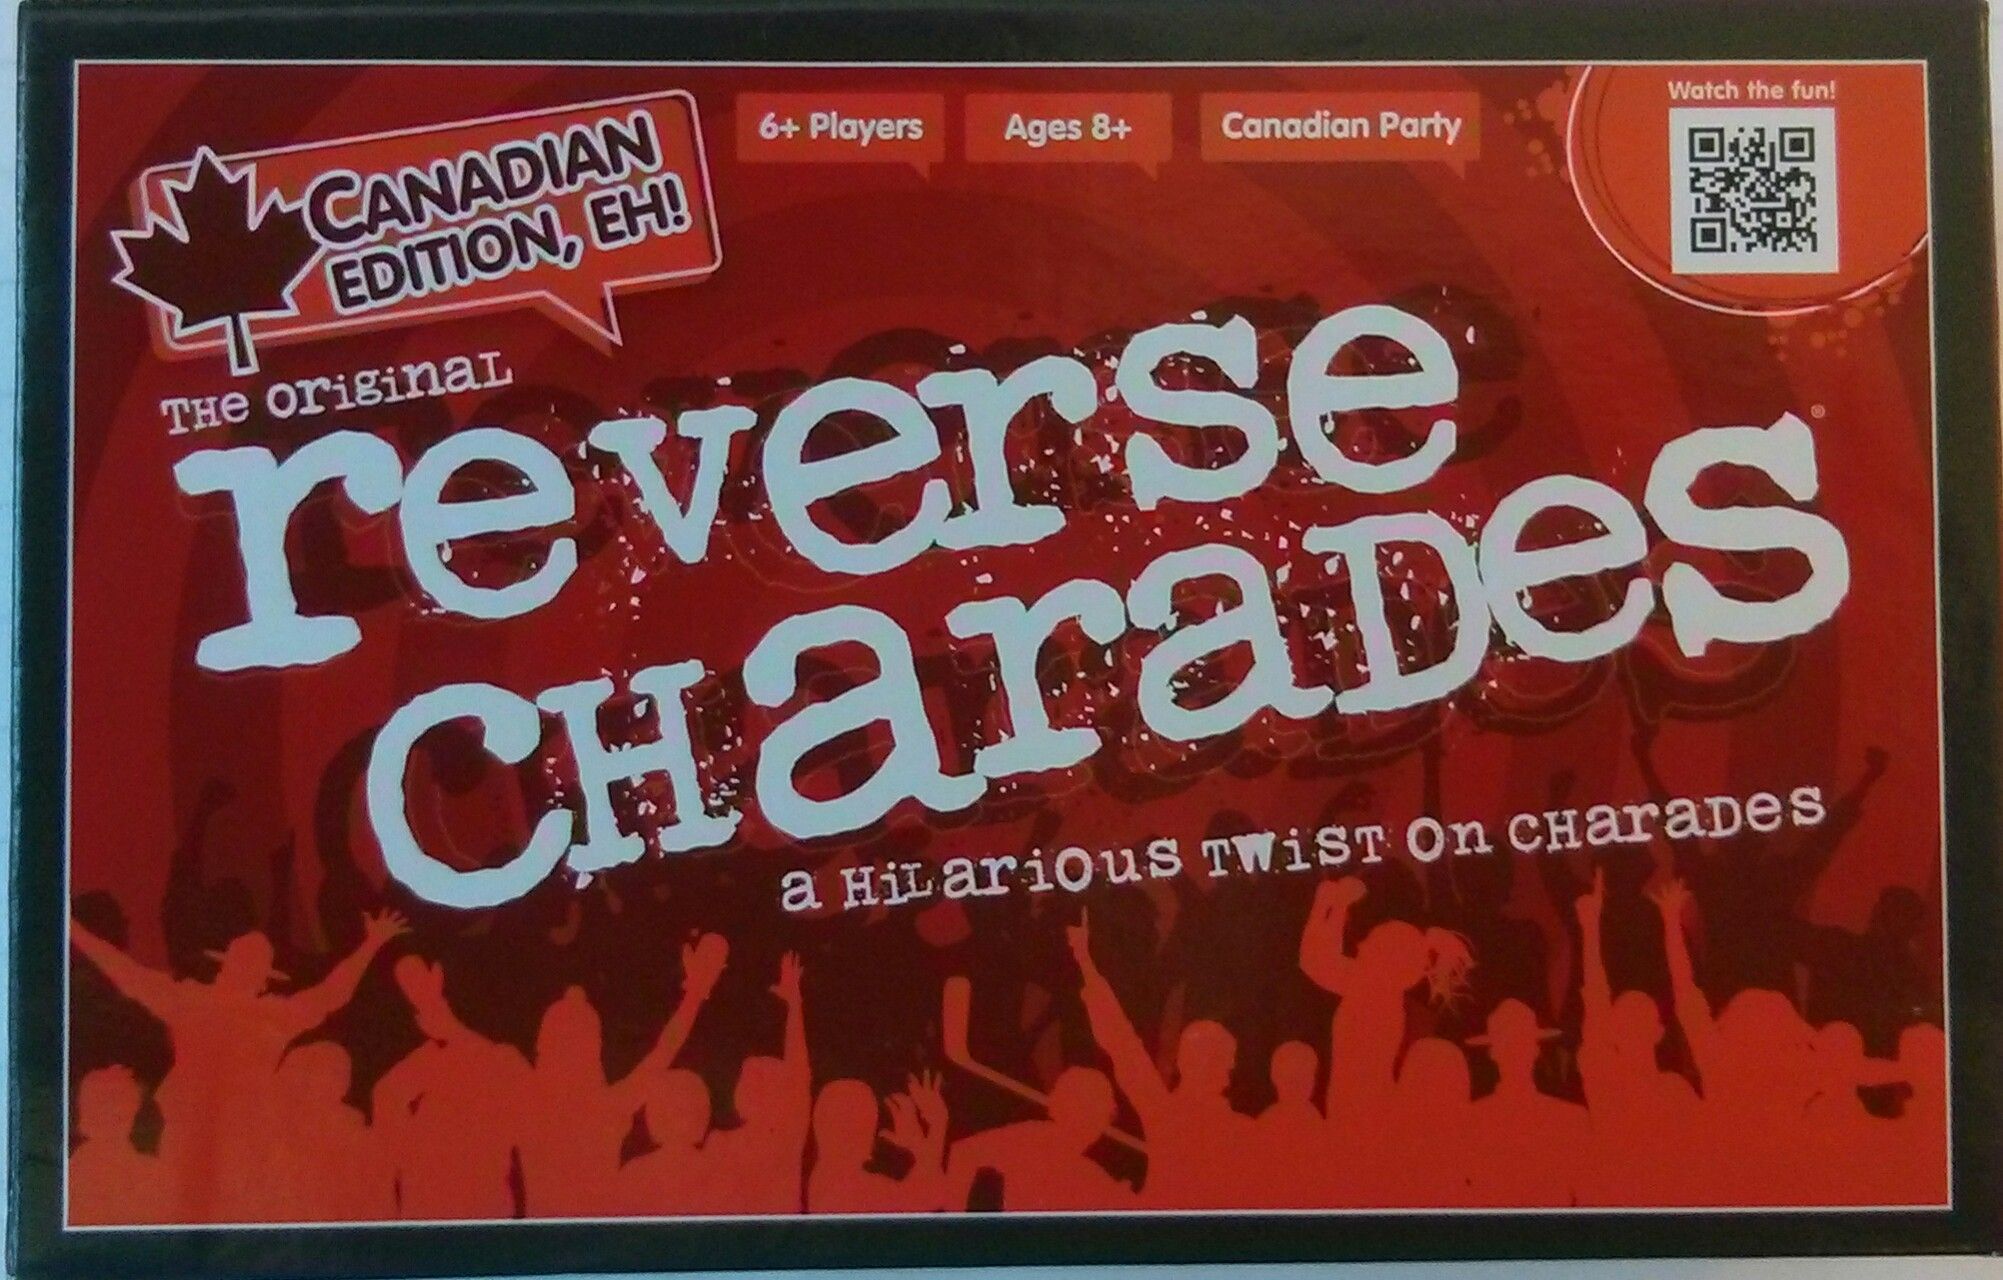 Reverse Charades: Canadian Edition, Eh!